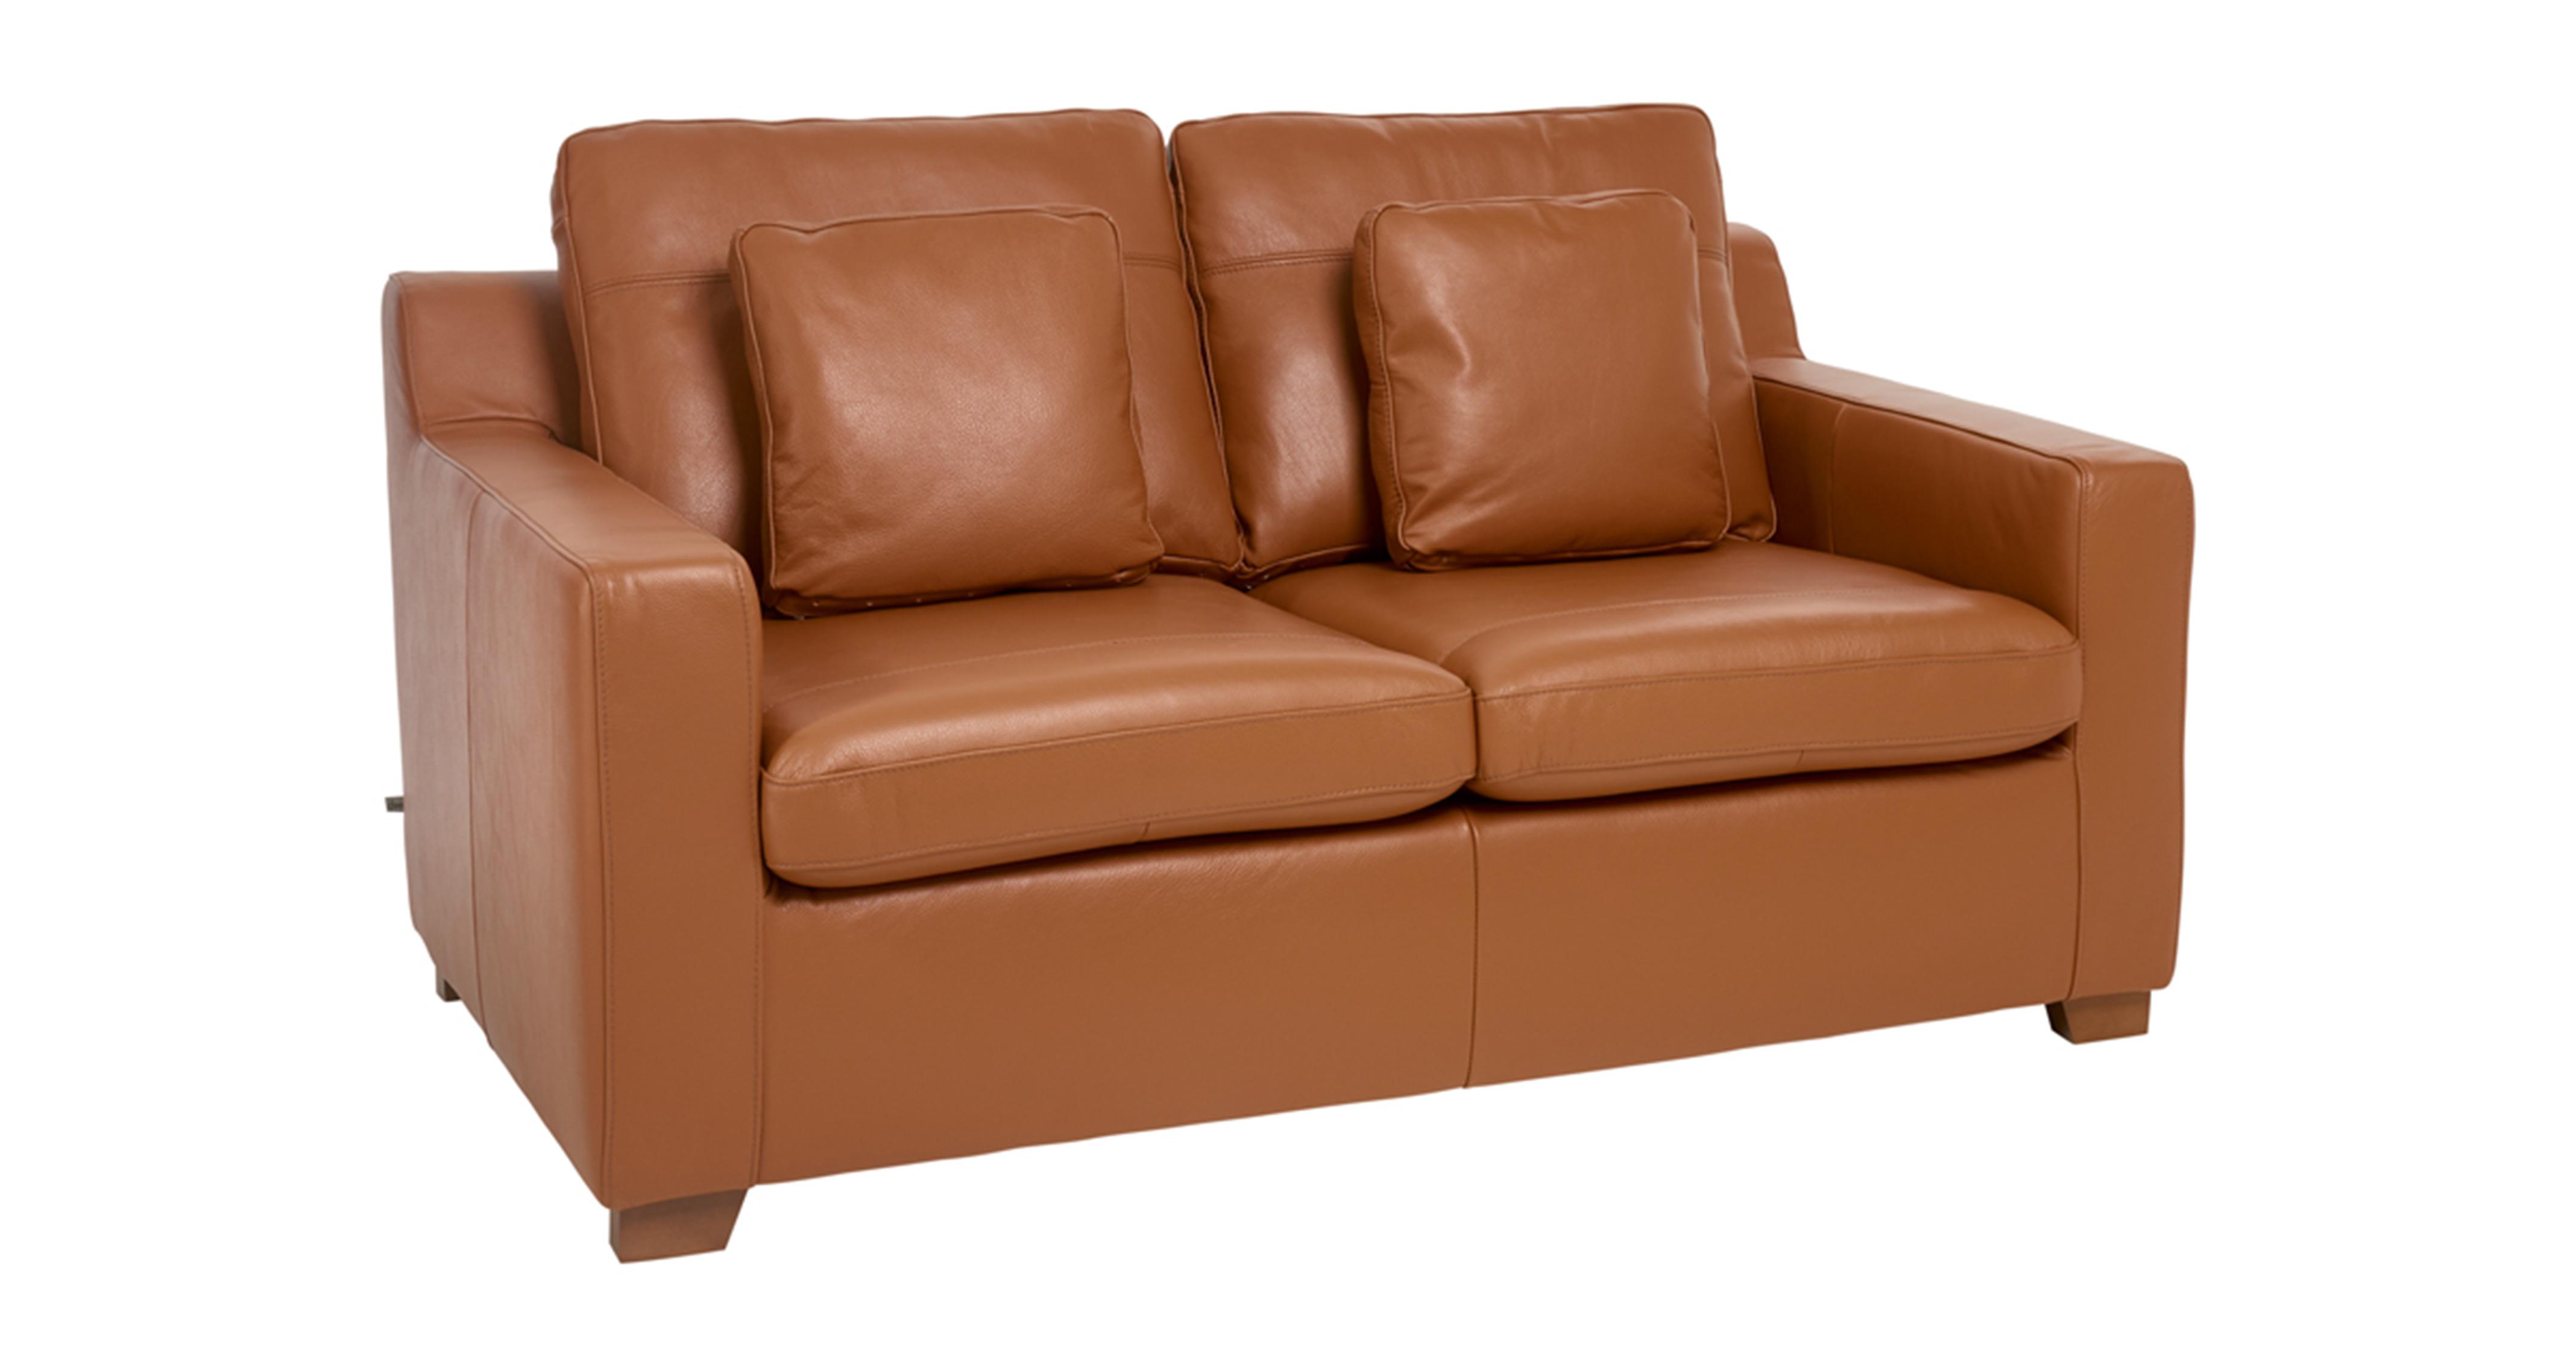 two seater leather sofa bed uk